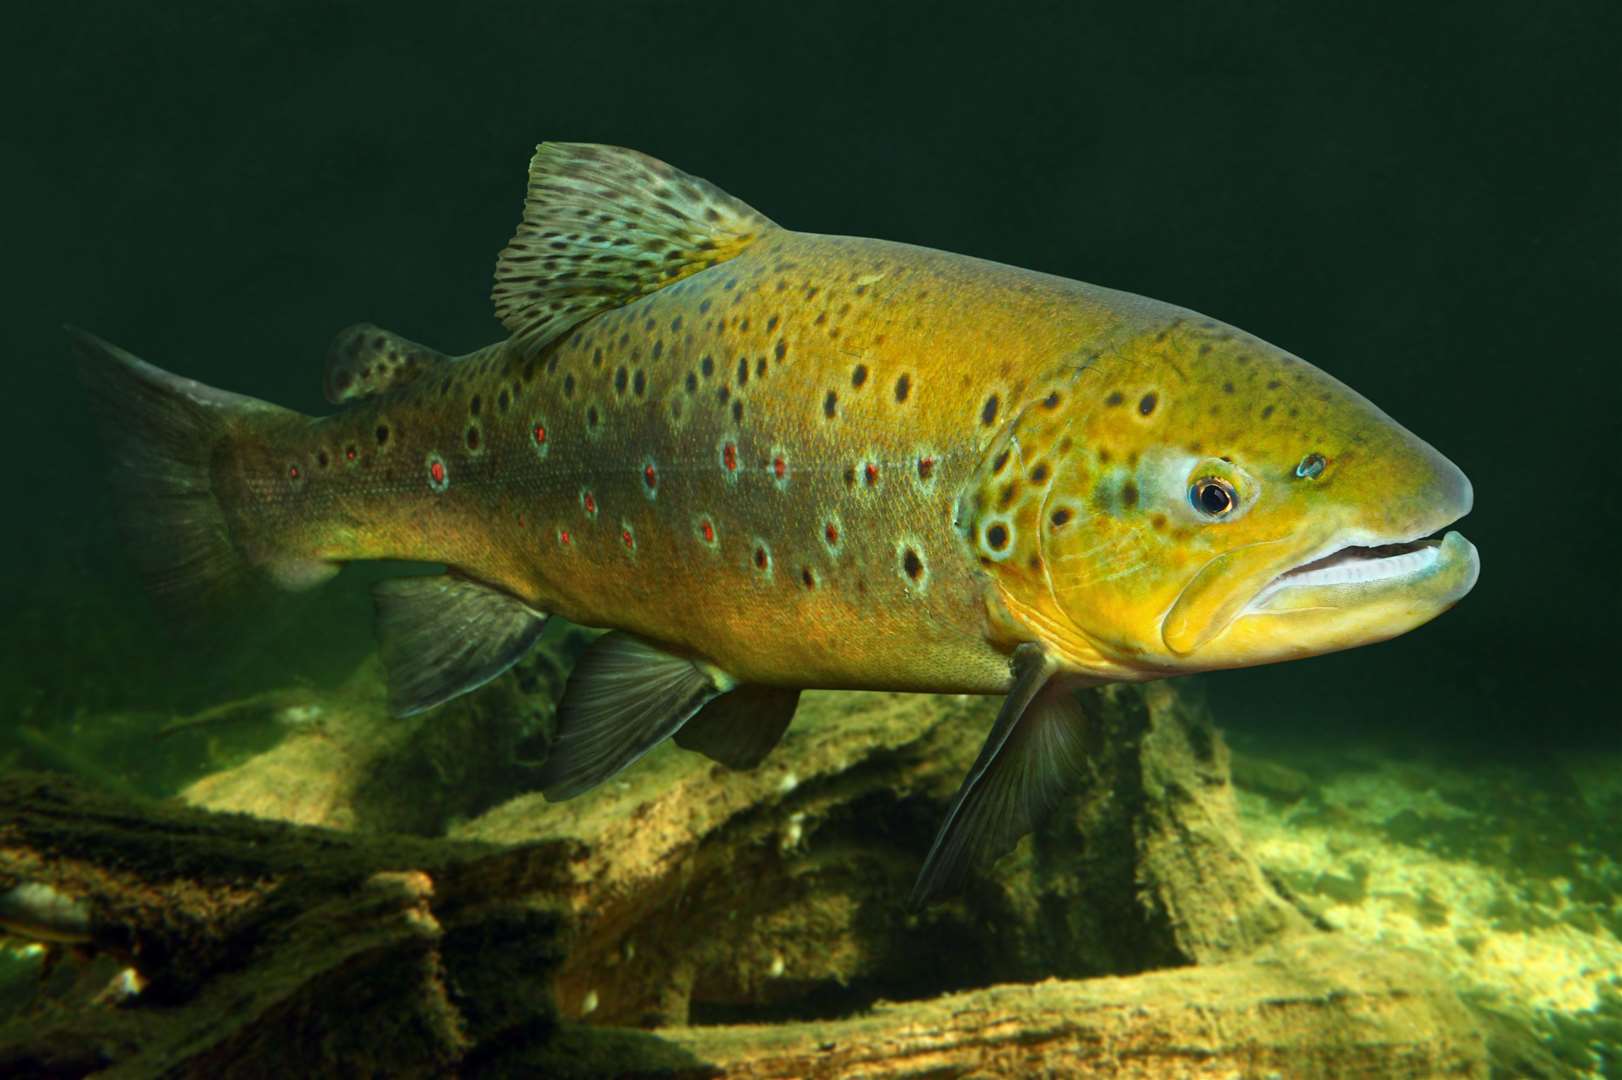 The Stour has stocks of Brown Trout